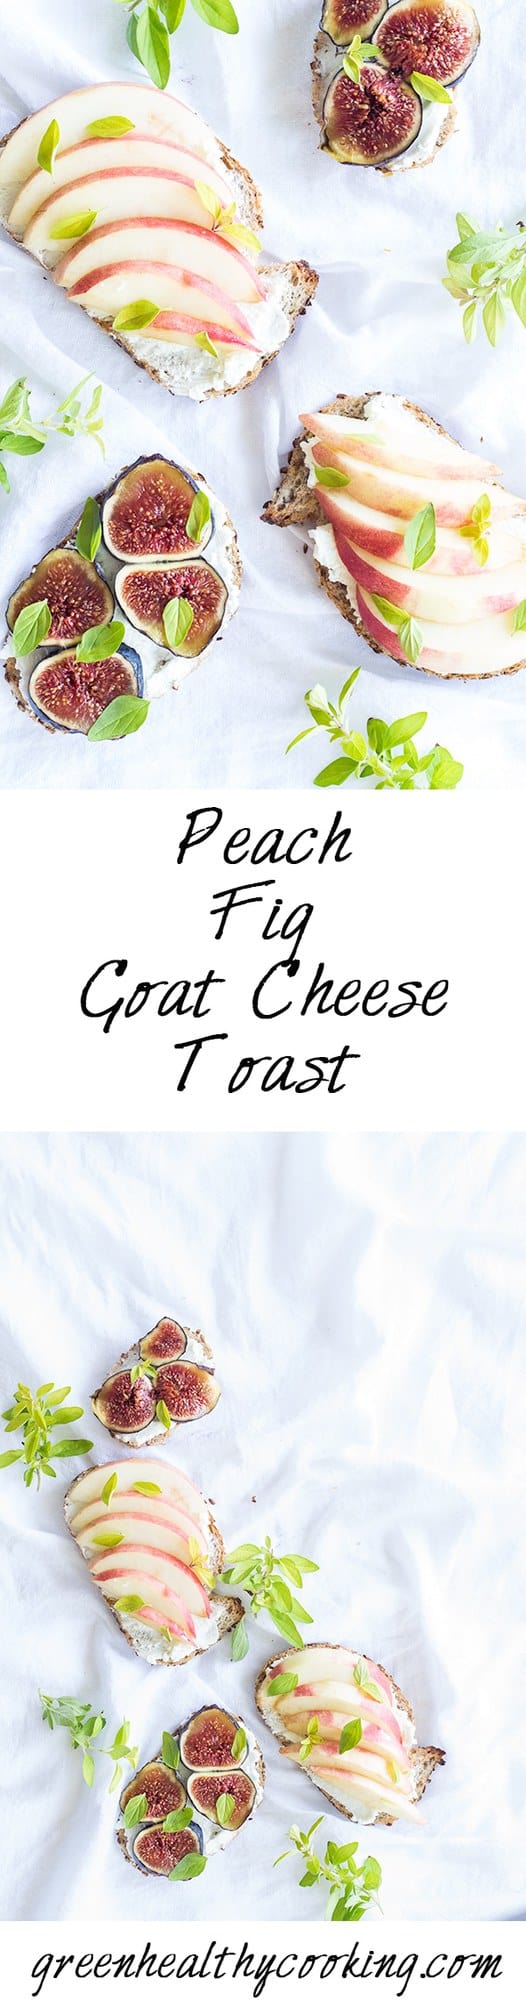 Collage of Peach Fig Goat Cheese Toast images with text overlay for Pinterest.